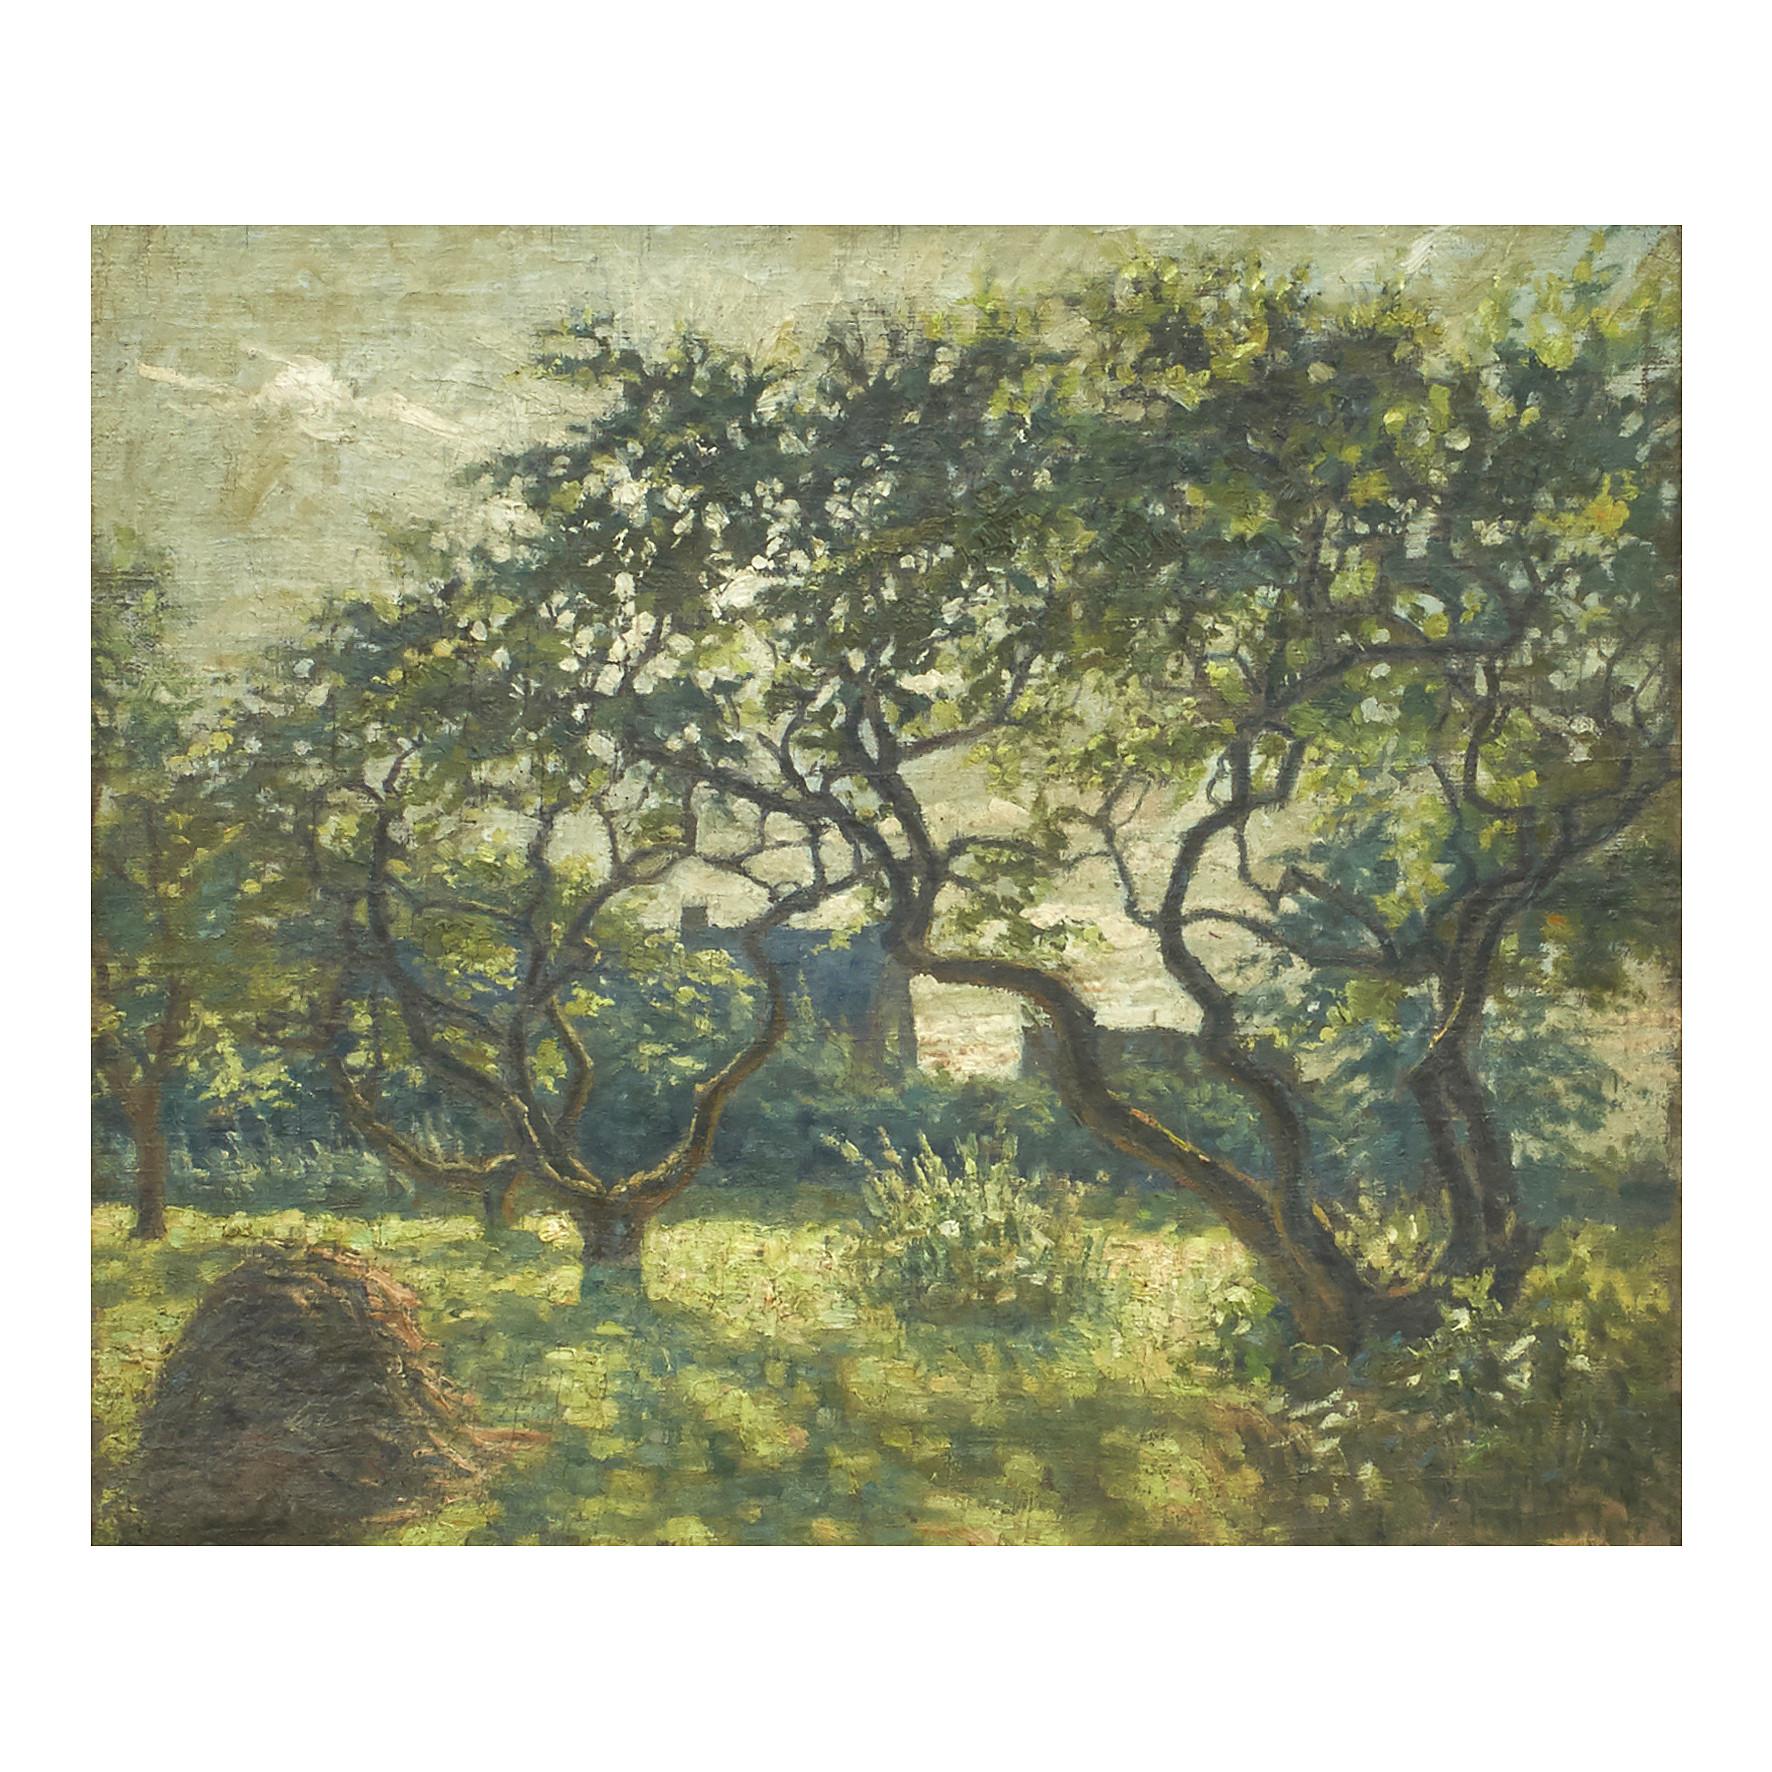 Impressionism. Unknown French painter (illegible signature).
Approx. year 1900.
Motif: An orchard with blossoming trees.
Oil on canvas. Wood-carved Montparnasse frame.